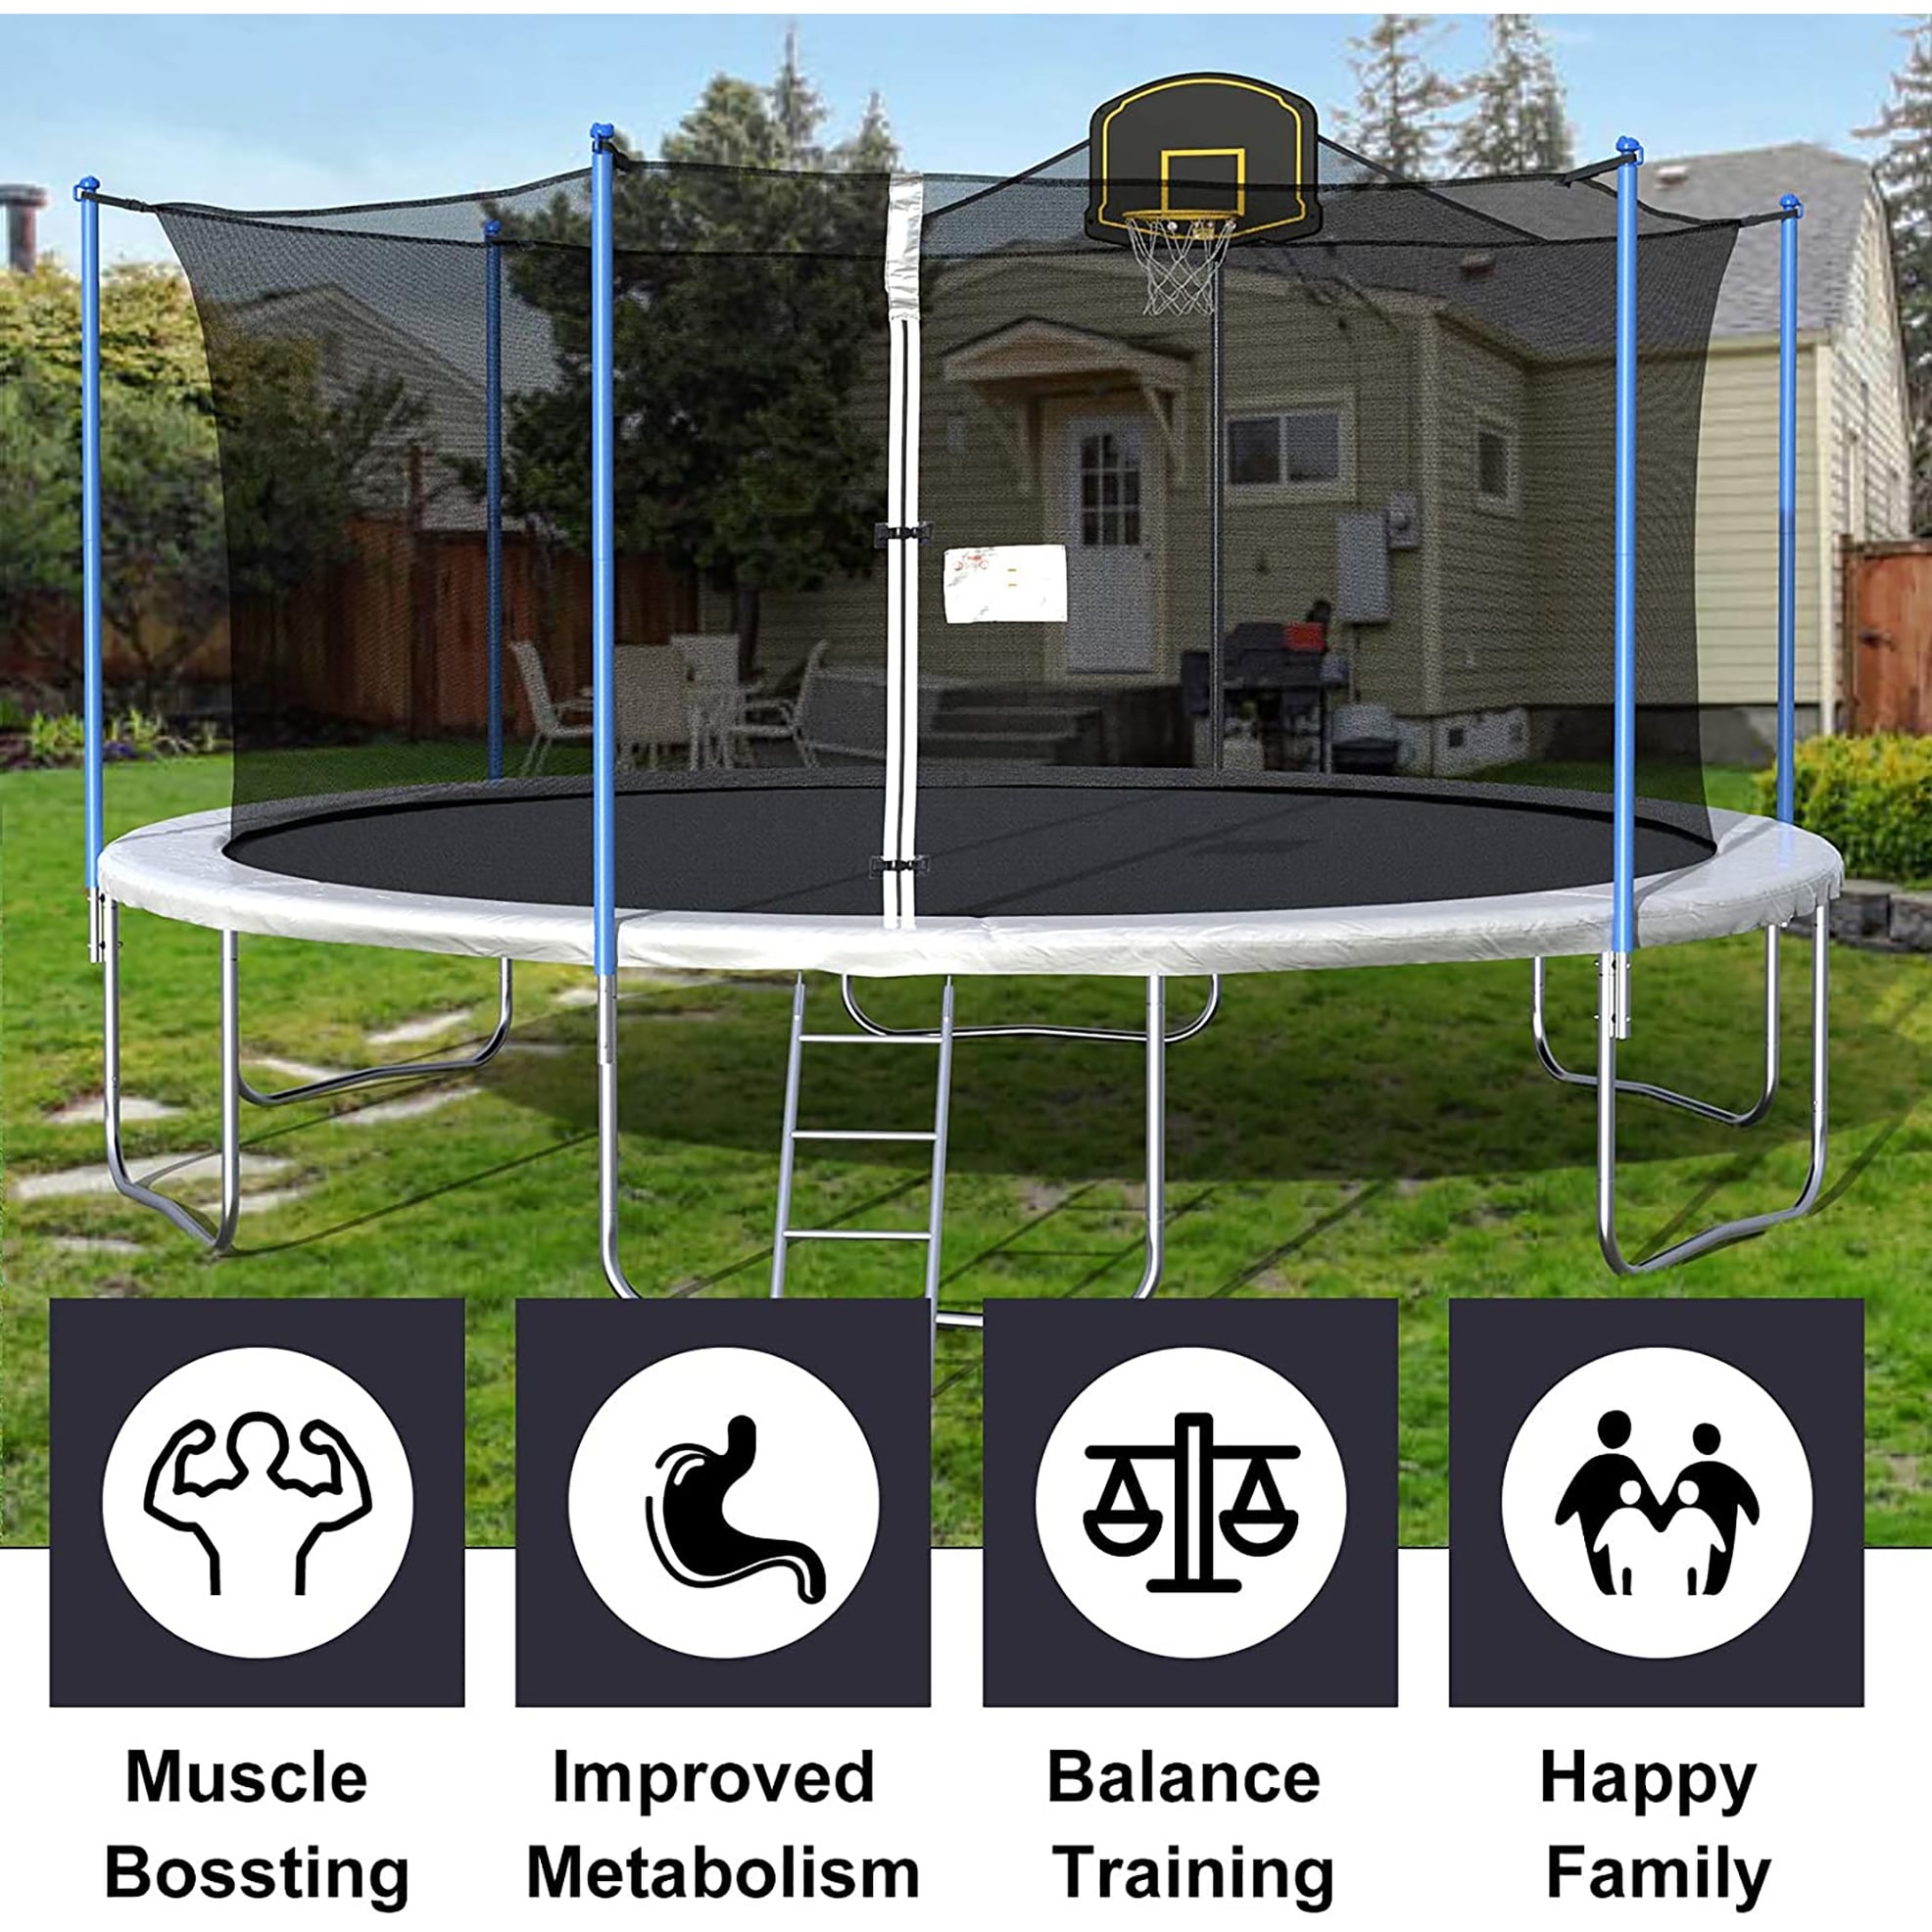 16Ft Trampoline with Enclosure Net Basketball Hoop - High Weight Capacity Big Outdoor Trampoline for Kids and Adults